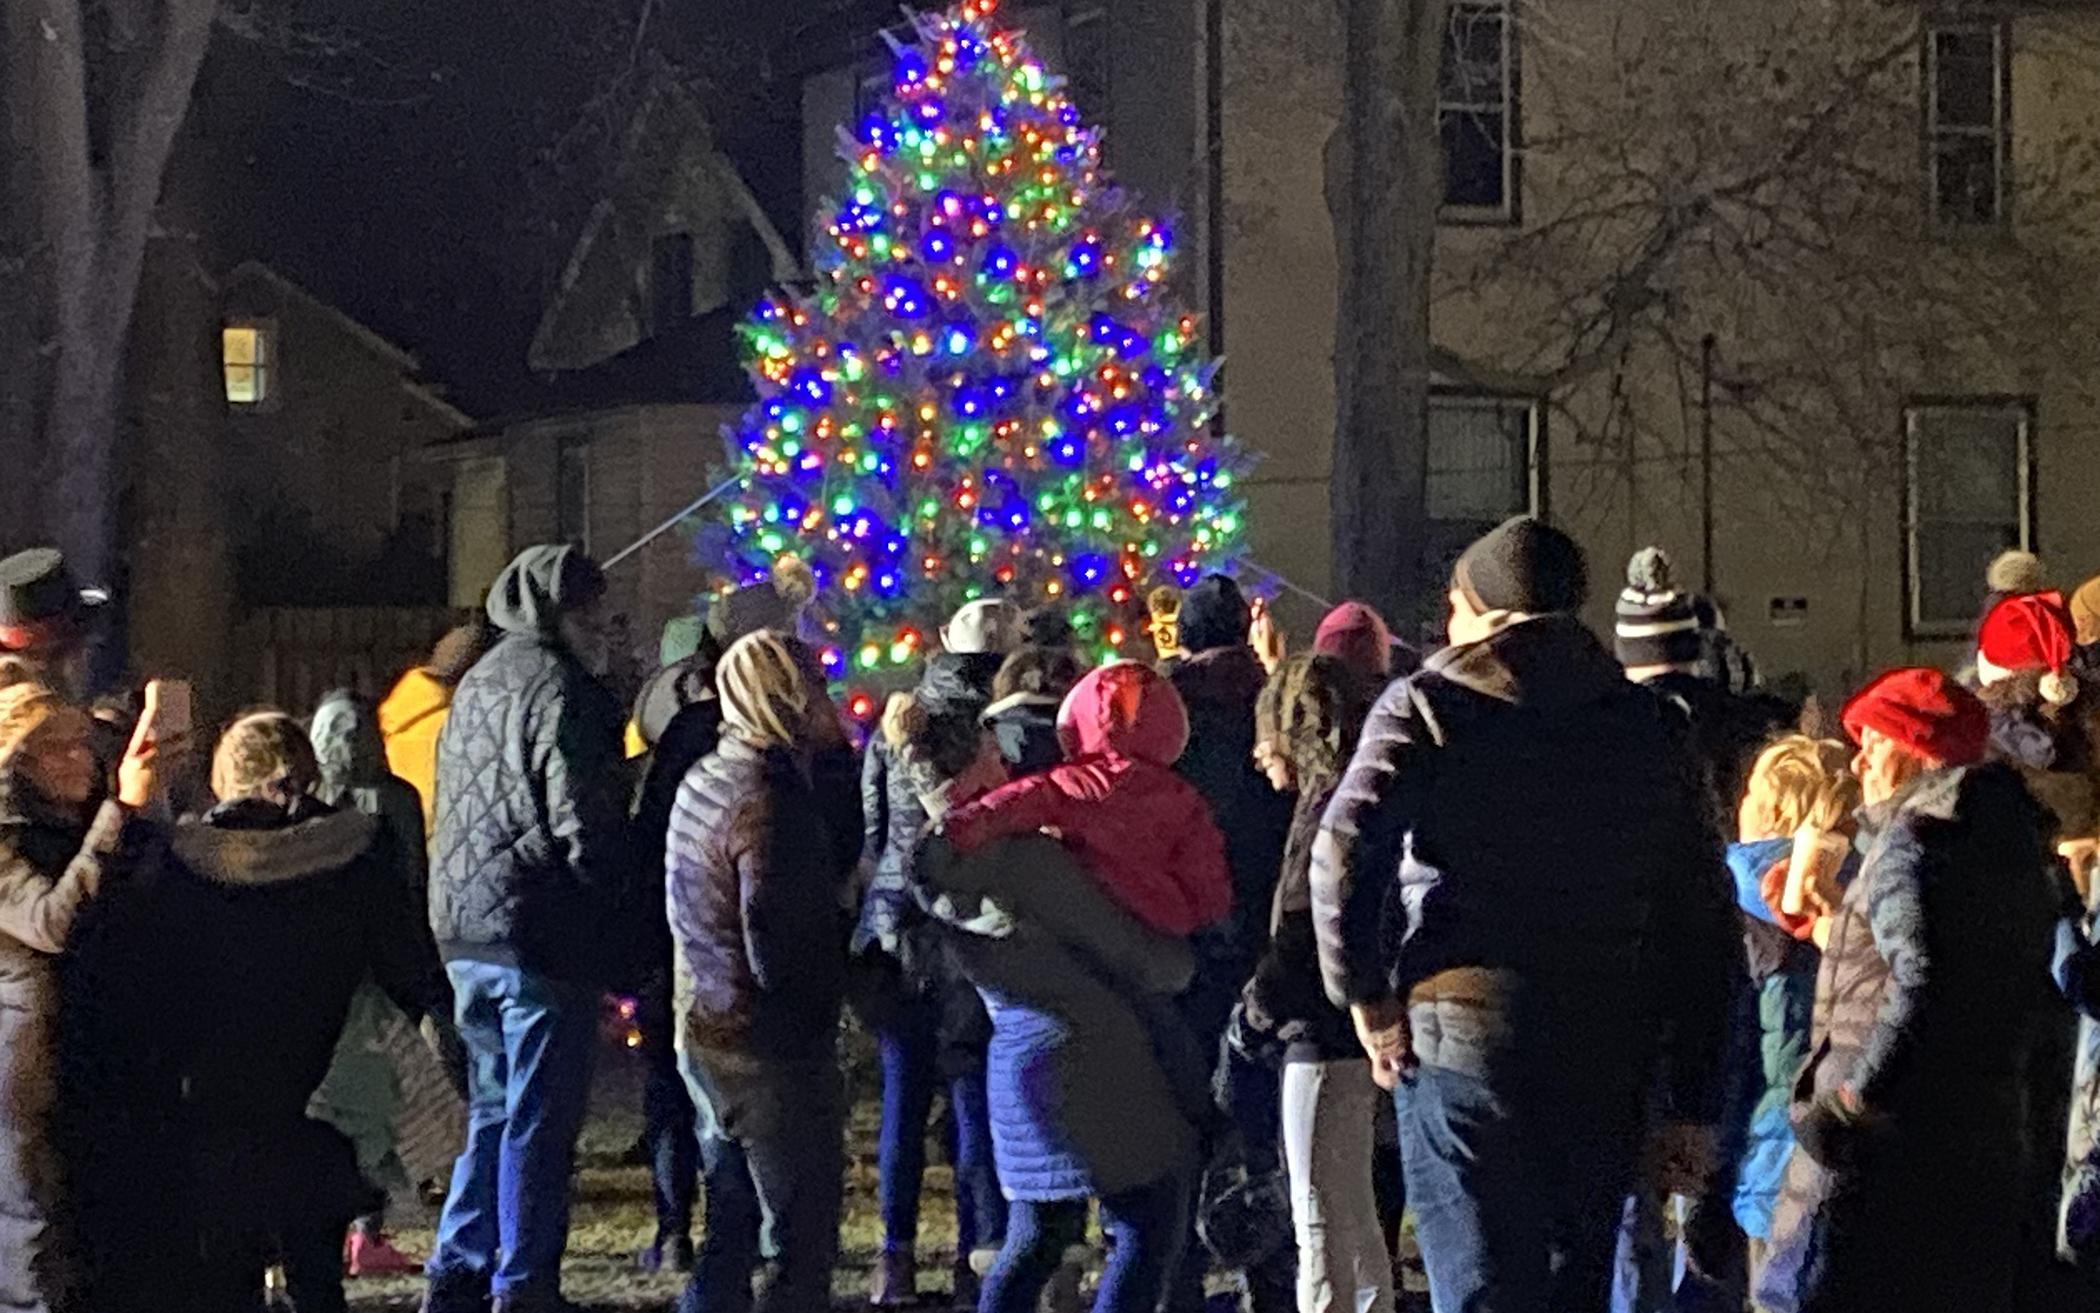 CRC Churches Support Grand Rapids Neighborhood Tree Lighting The Banner